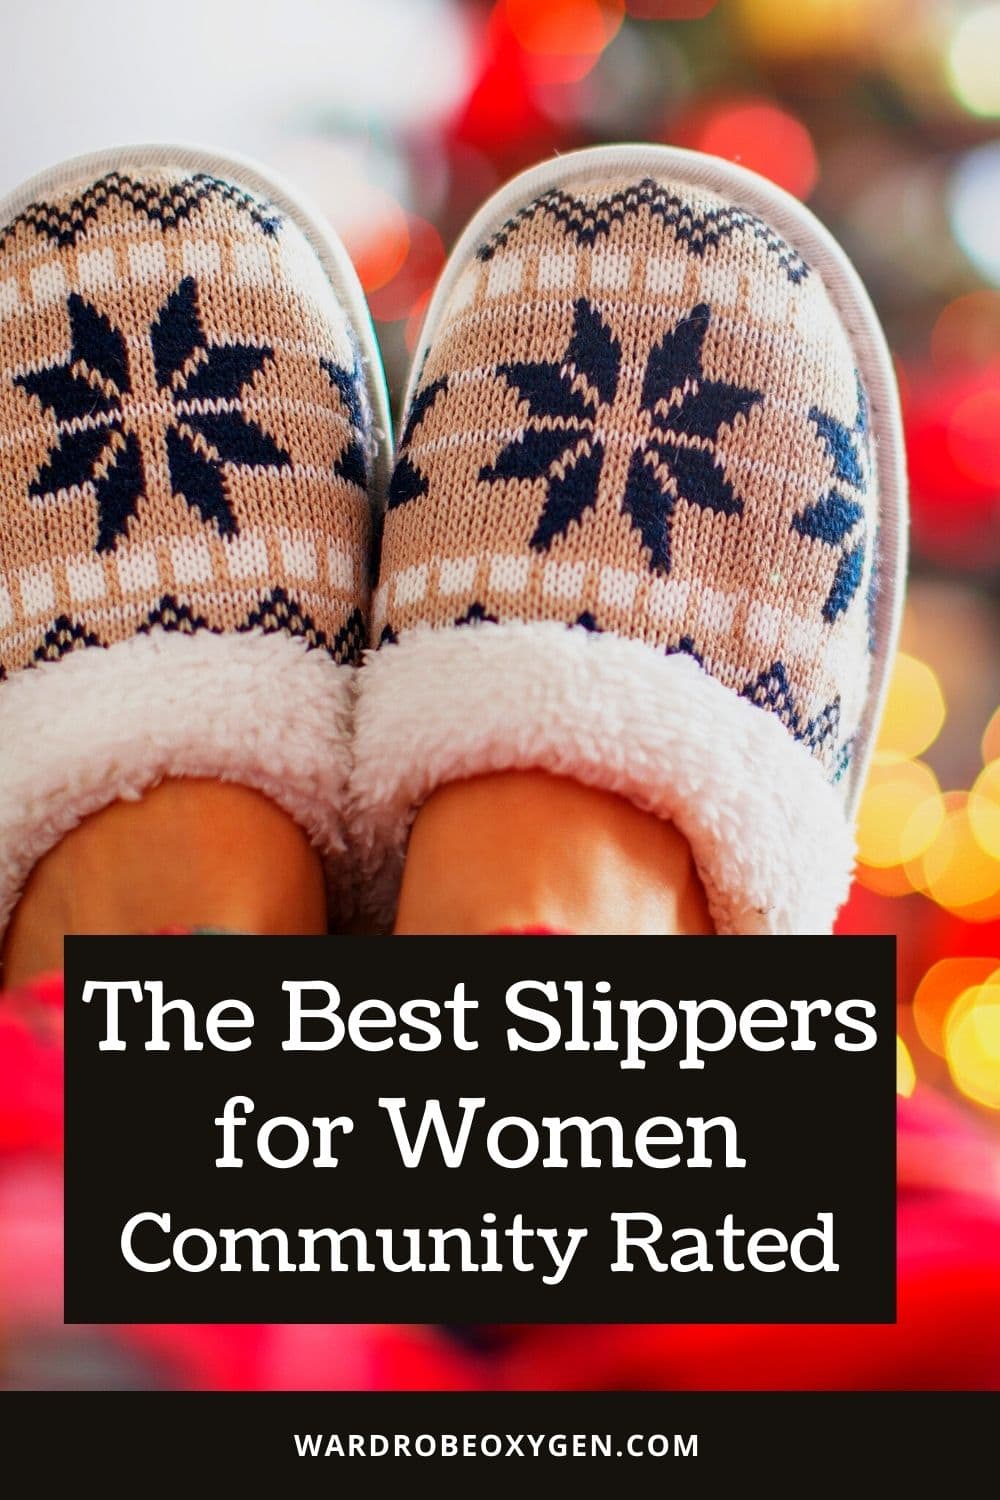 You Deserve Some New Slippers: The Best Slippers for Women Rated by the Wardrobe Oxygen Community